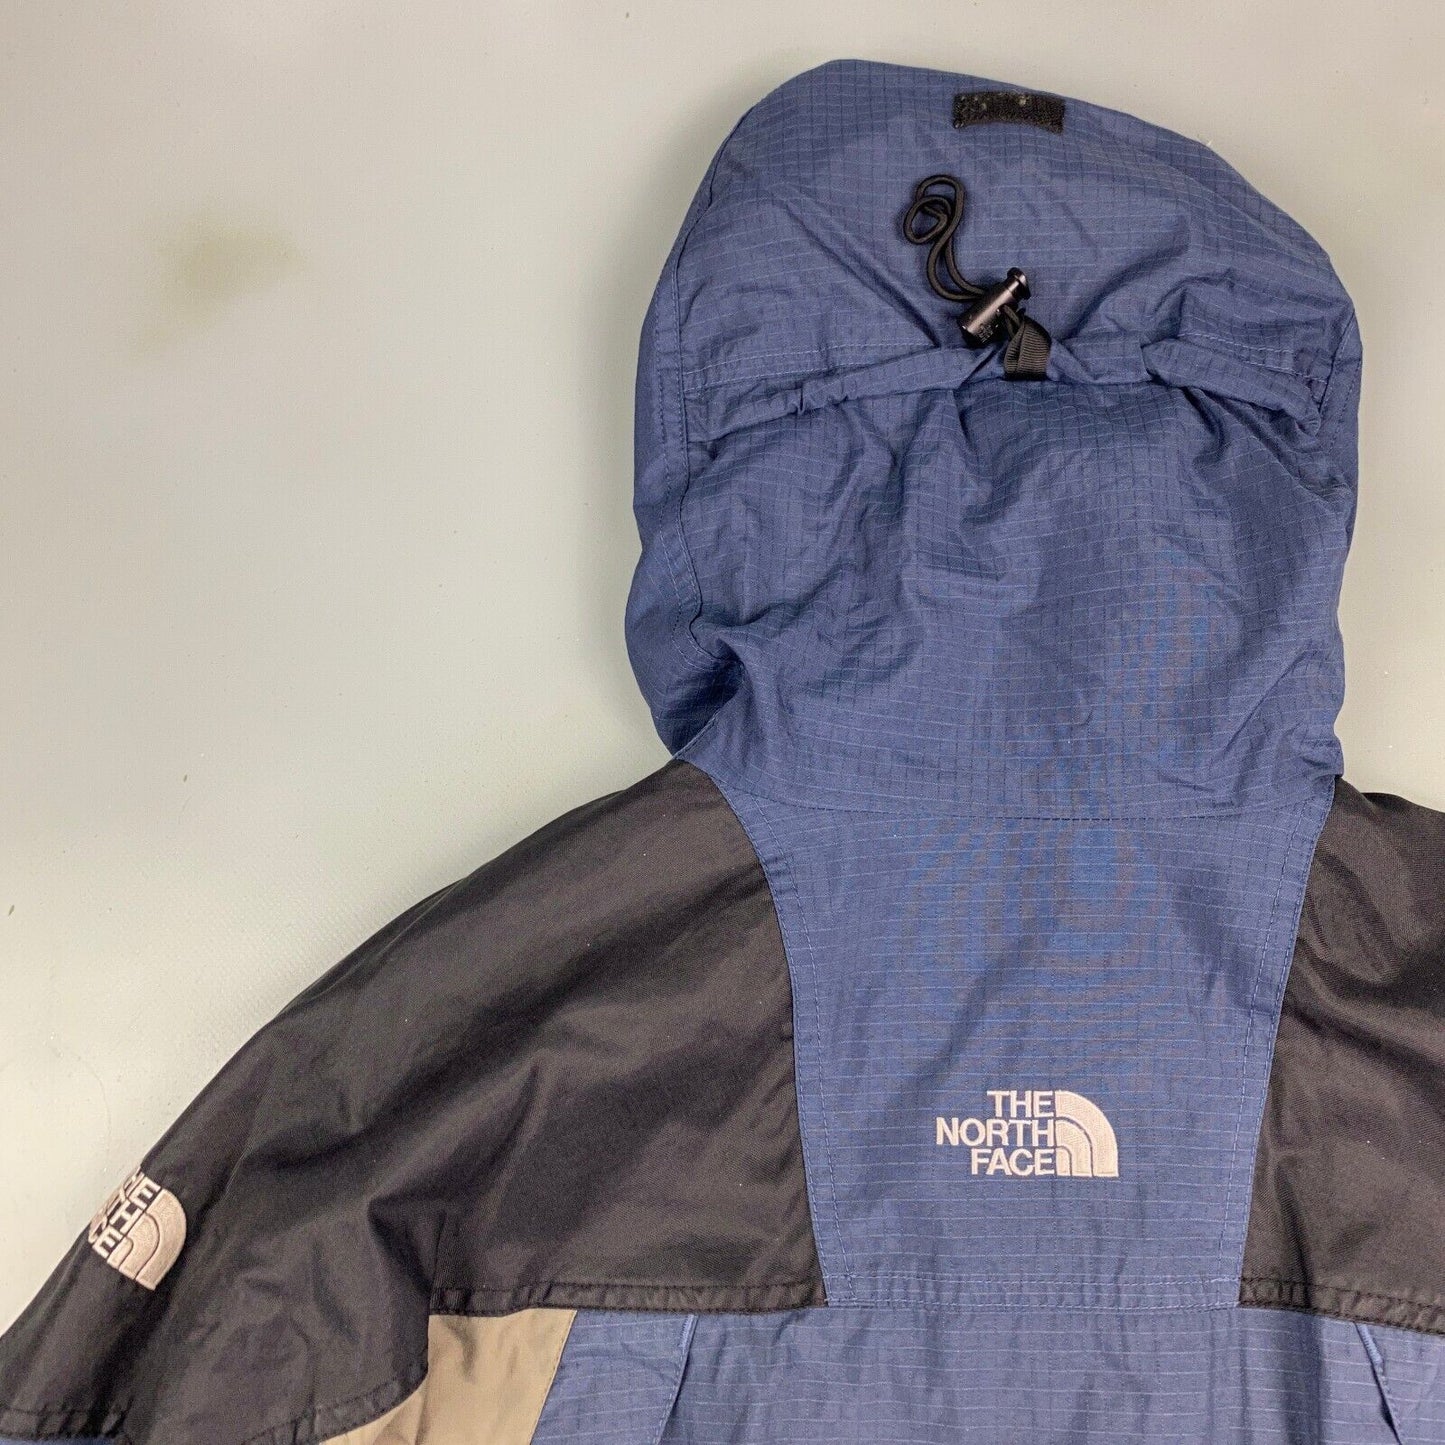 VINTAGE The North Face Technical Mountain Light Jacket sz S - M Adult